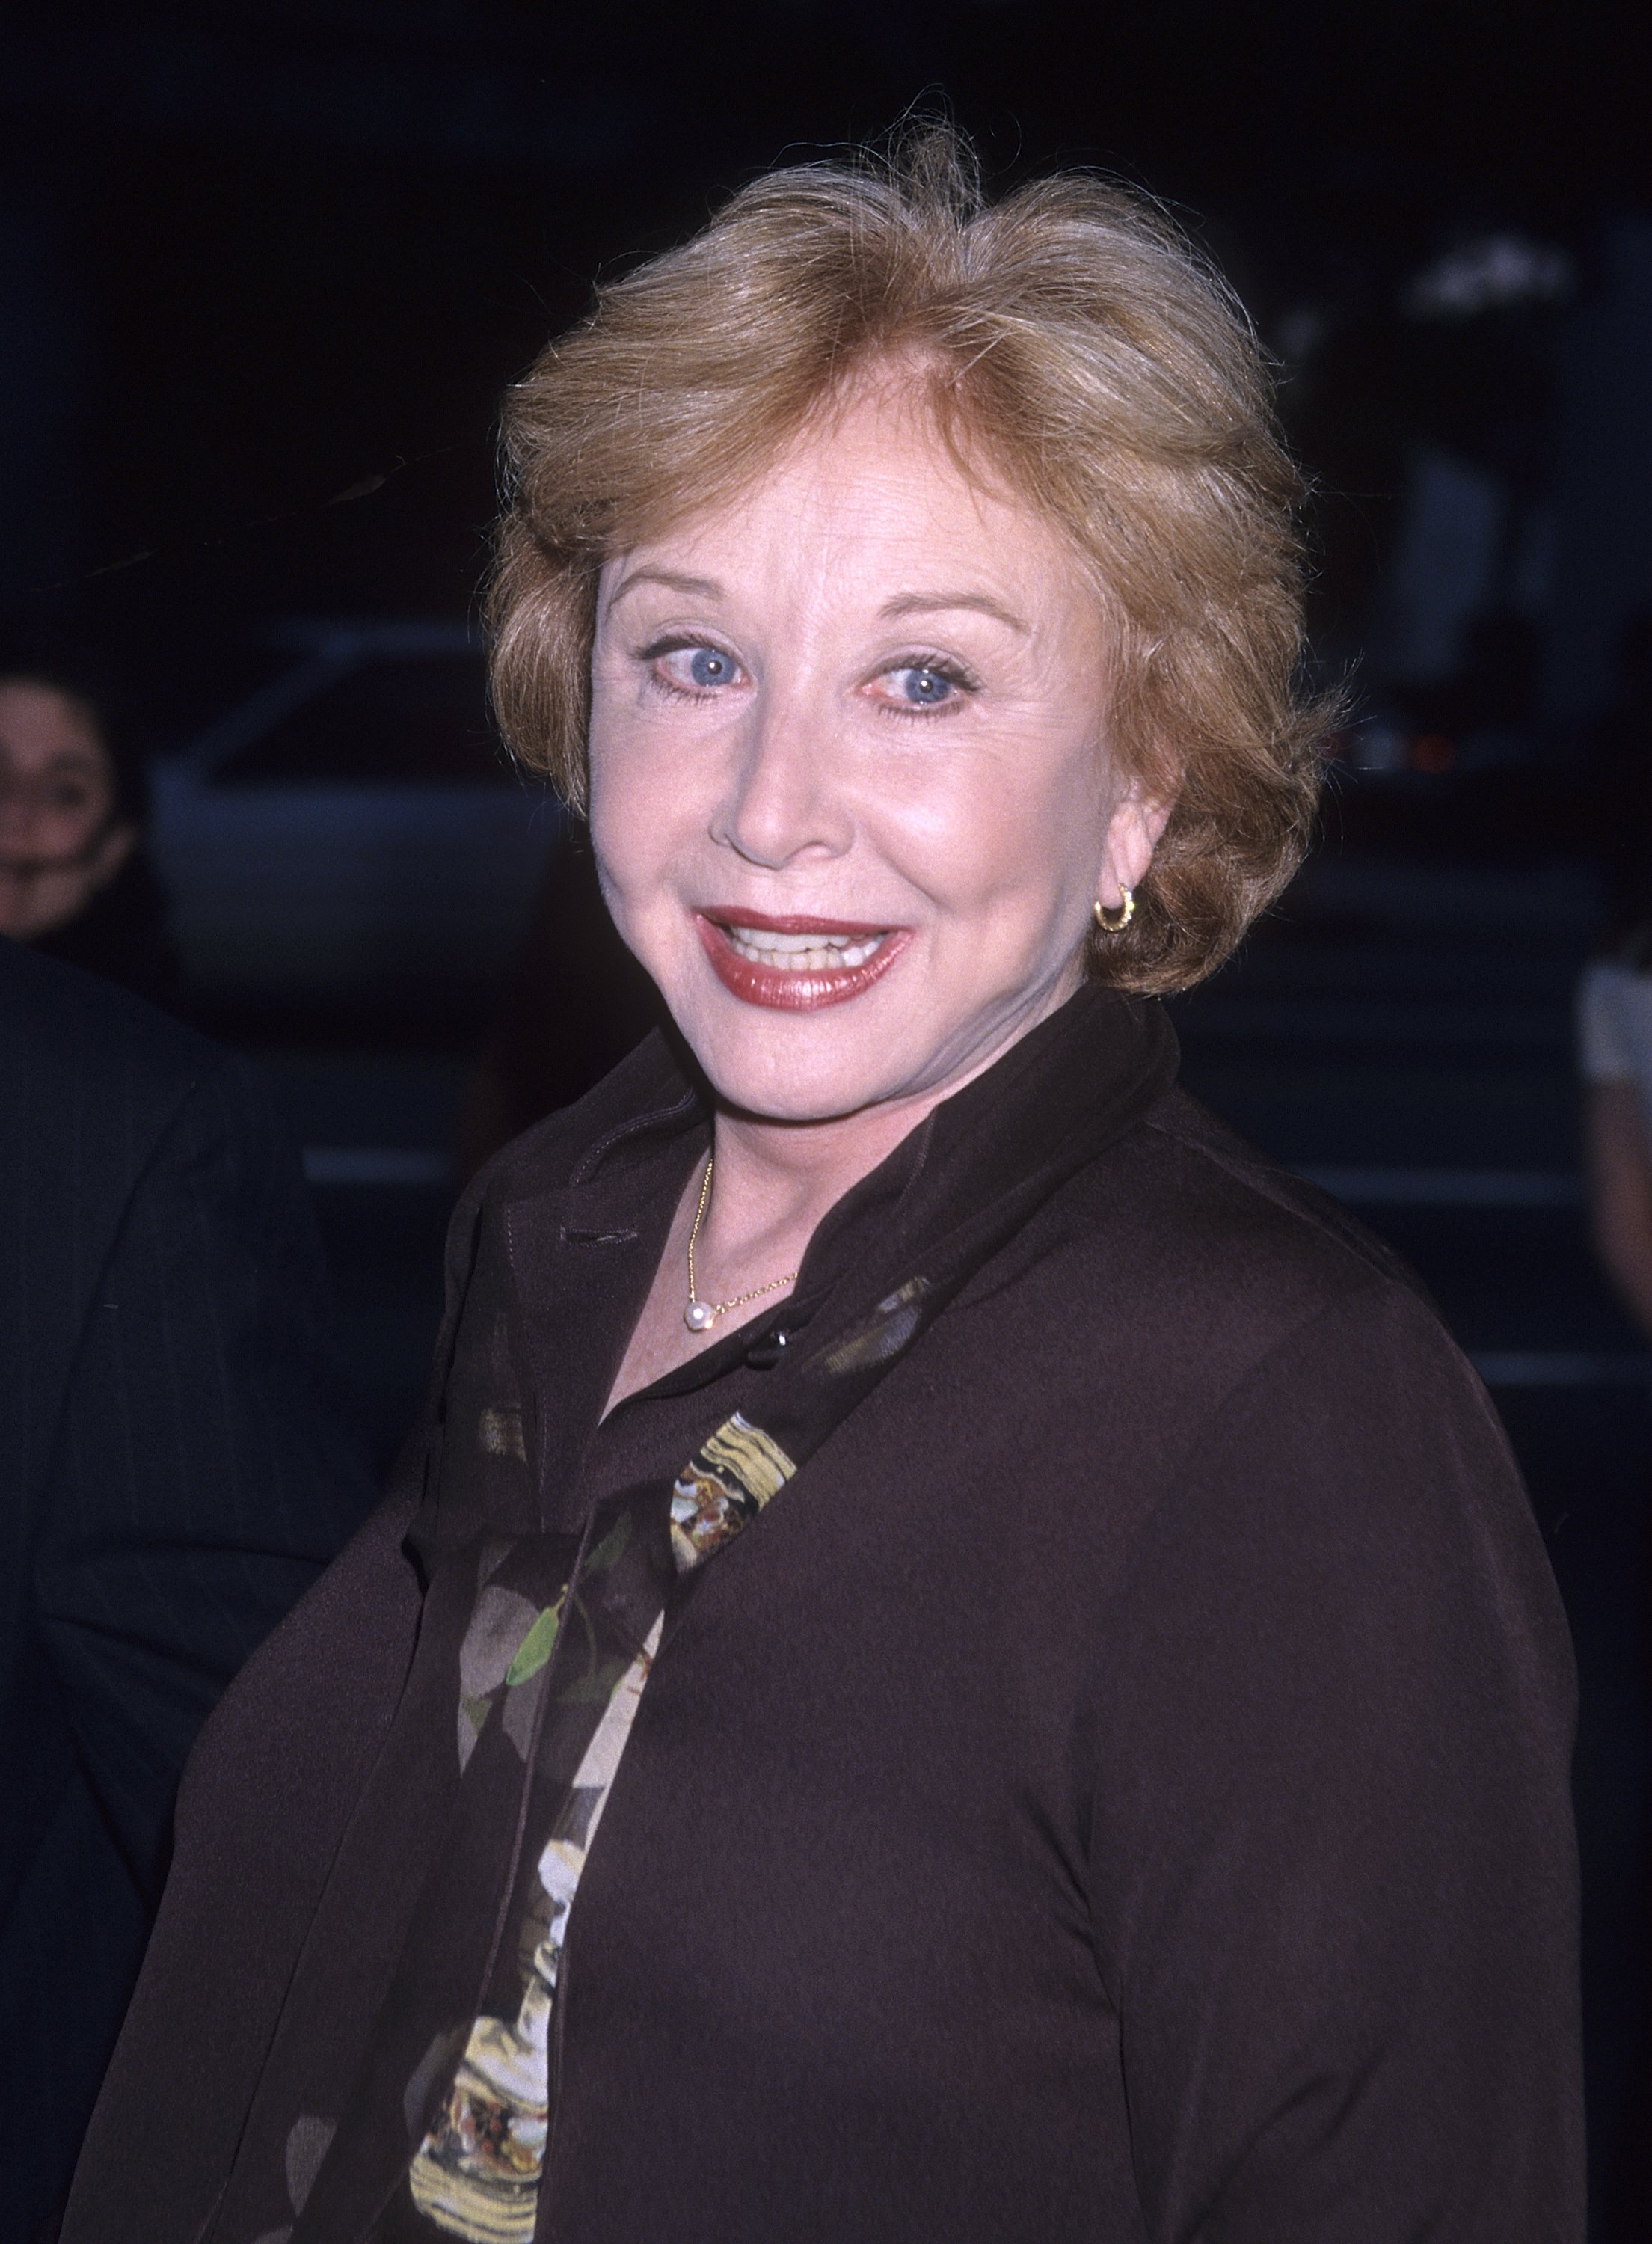 Michael Learned attends the screening of "Introducing Dorothy Dandridge" at the Academy Theatre on August 9, 1999 in Beverly Hills, California ┃Source: Getty Images